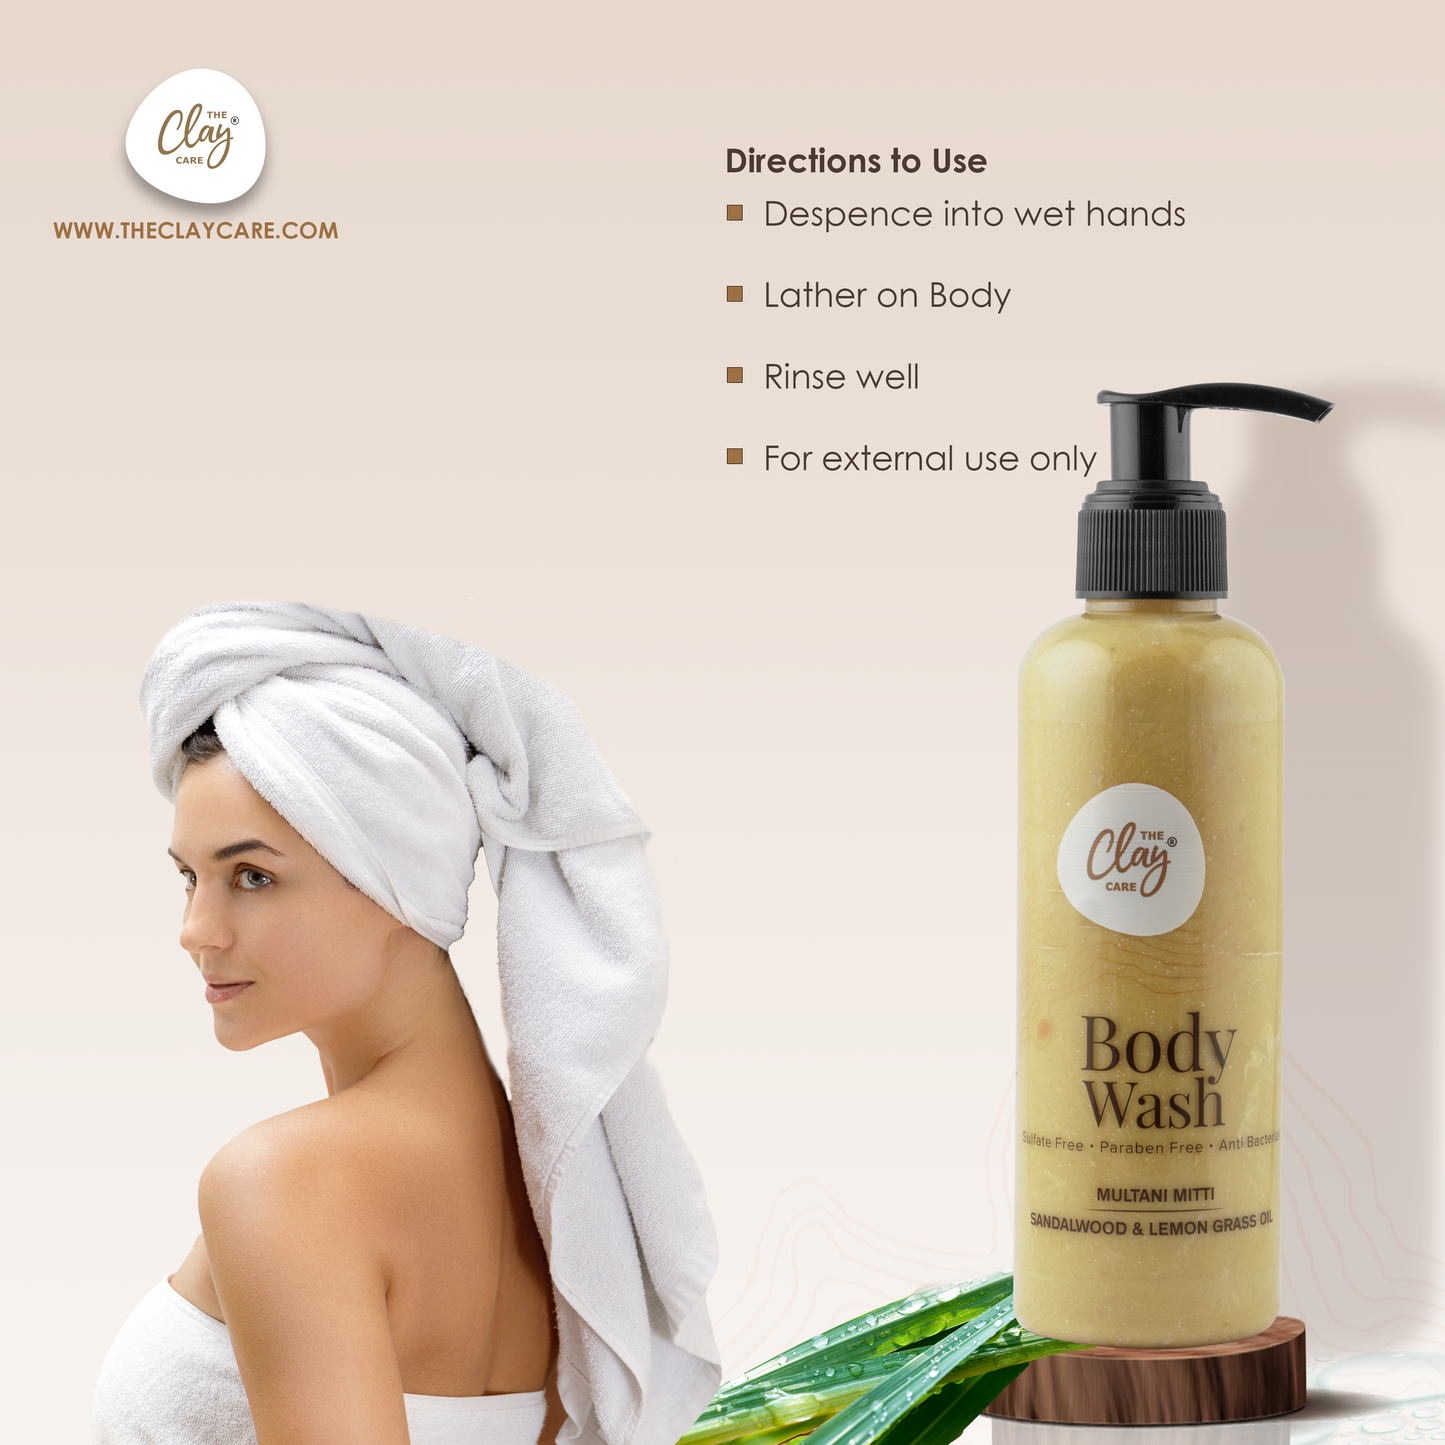 Clay Care - Anti-Bacterial Body Wash with Multani Mitti, Sandalwood and Lemon Grass Oil | Suitable for All Skin Type | Men and Women - 200 ml